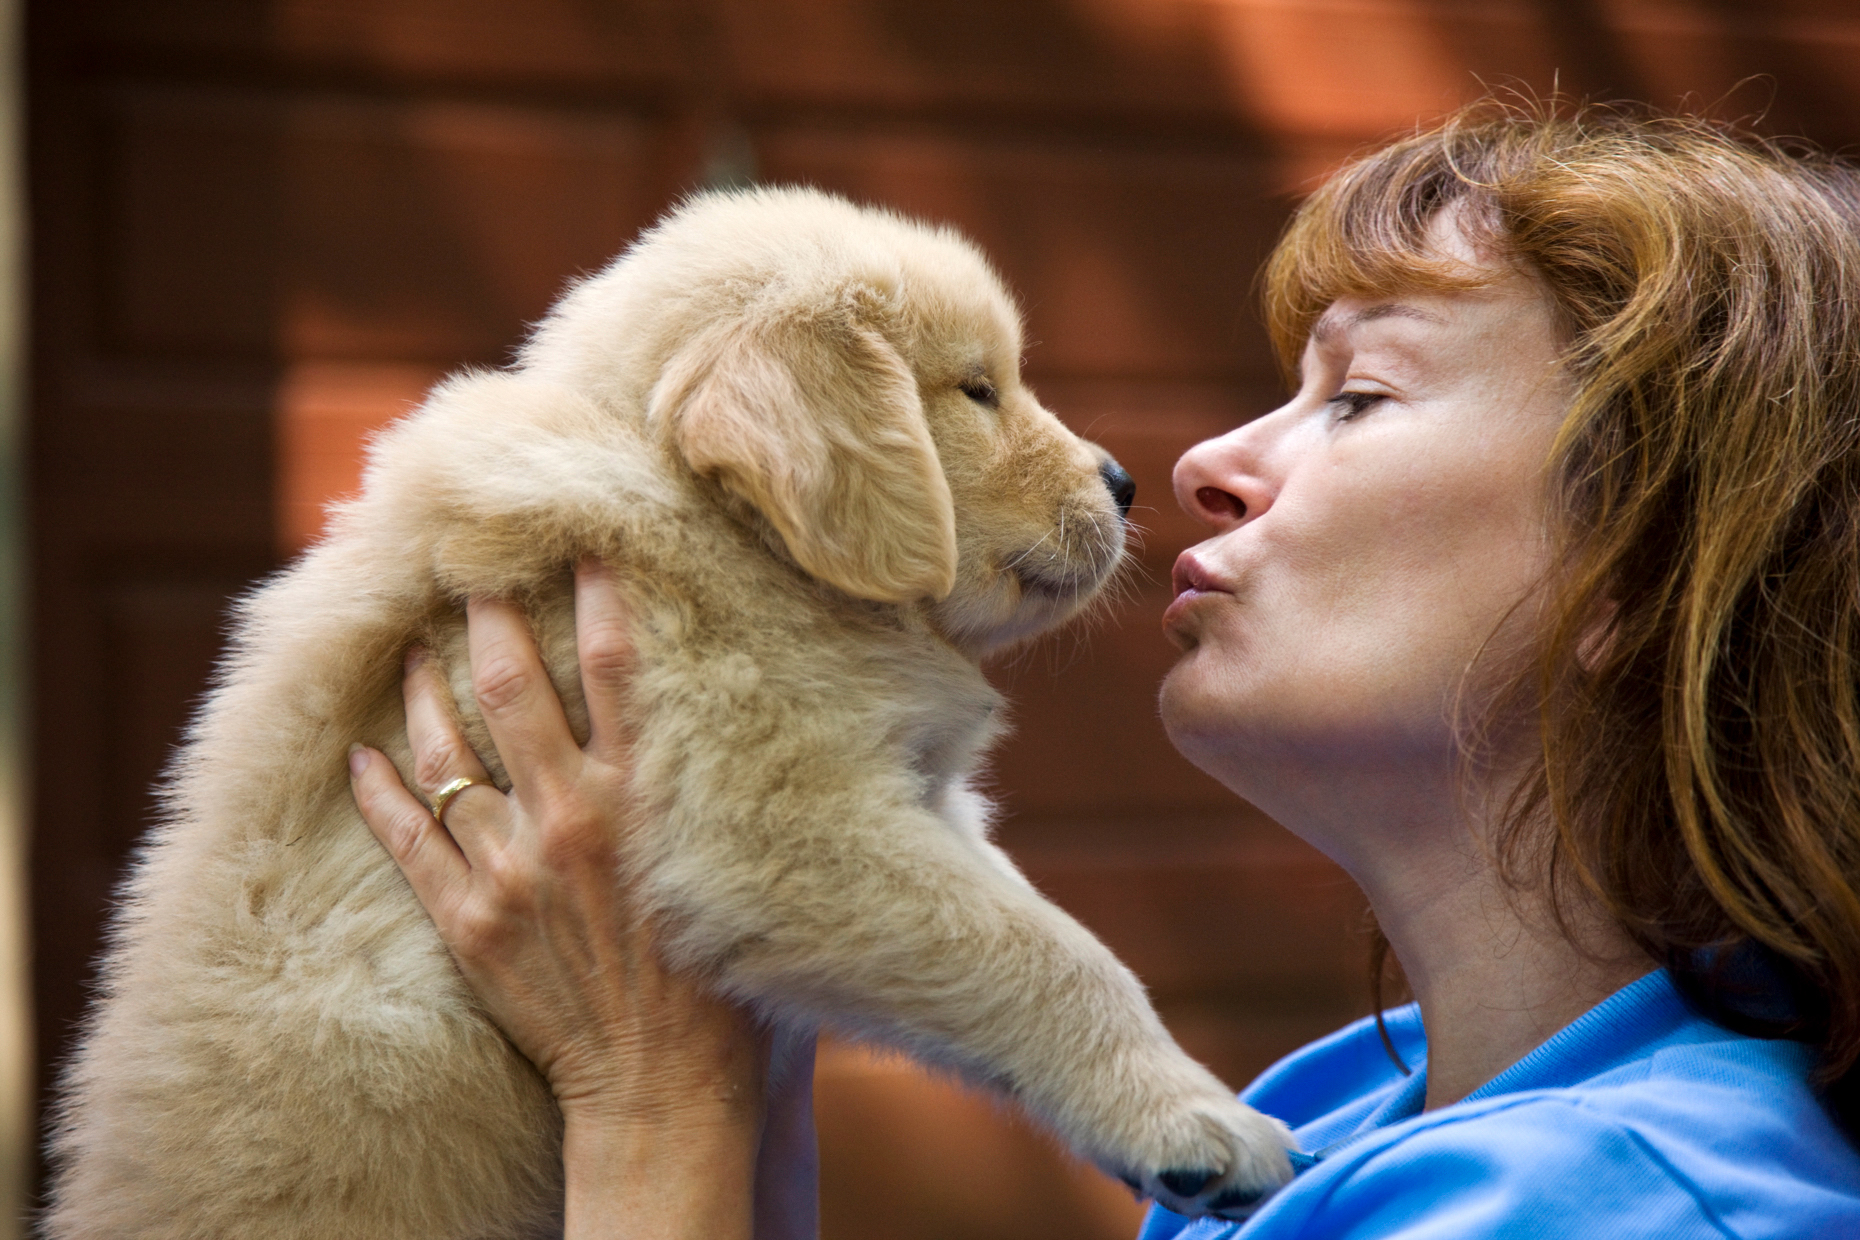 Middle aged woman holding six week old Golden Retriever puppy.